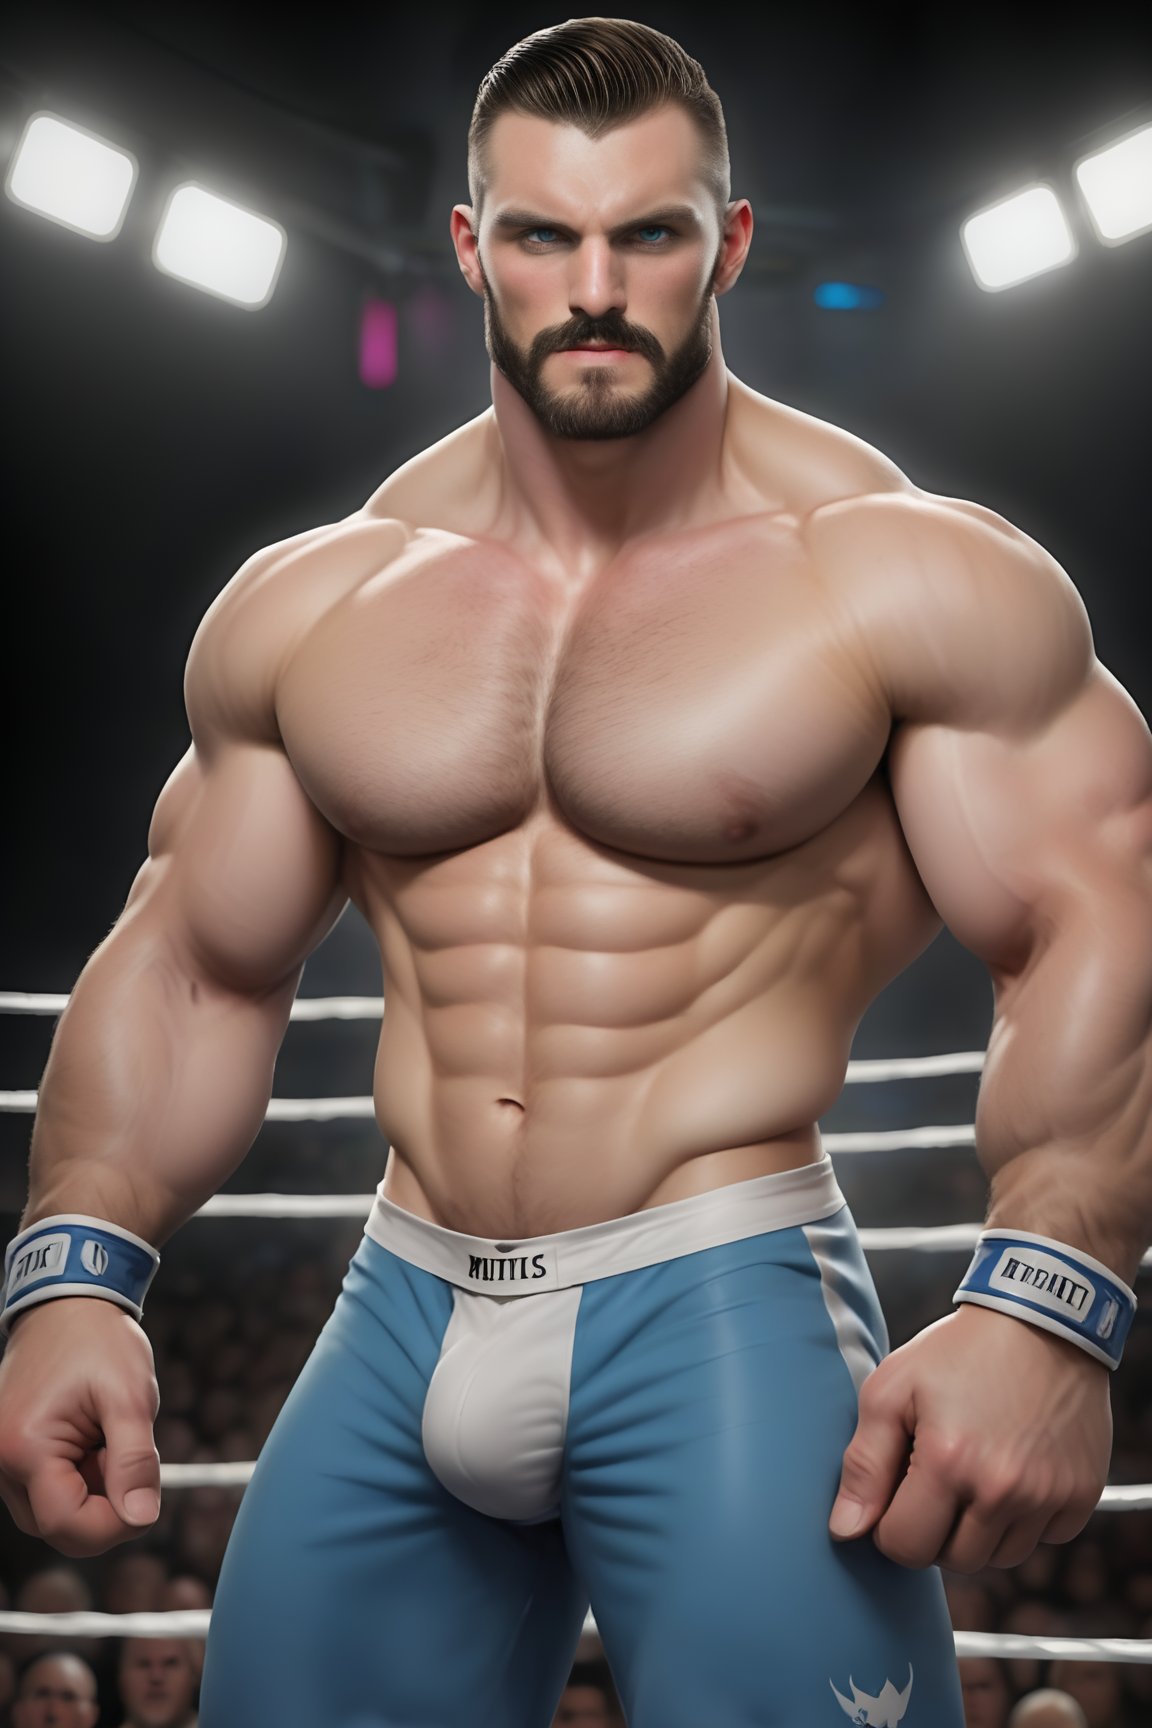 here's a prompt for an sd image:

a majestic english wrestler stands tall and muscular on a dimly lit wrestling ring, his piercing blue eyes intensely gazing into the camera lens. he wears a well-rendered singlet with large white wristbands, broad shoulders and neck, and defined cheekbones with a strong jawline accentuated by brown facial hair and an undercut comb-back hairstyle. his determined face is highlighted under the intense spotlight, while the soft-focused crowd in the background cheers wildly, their faces barely visible behind the haze of stage smoke and misty lights. banners hang from the rafters above, adding to the drama and tension of the cinematic wrestling scene. falk0man